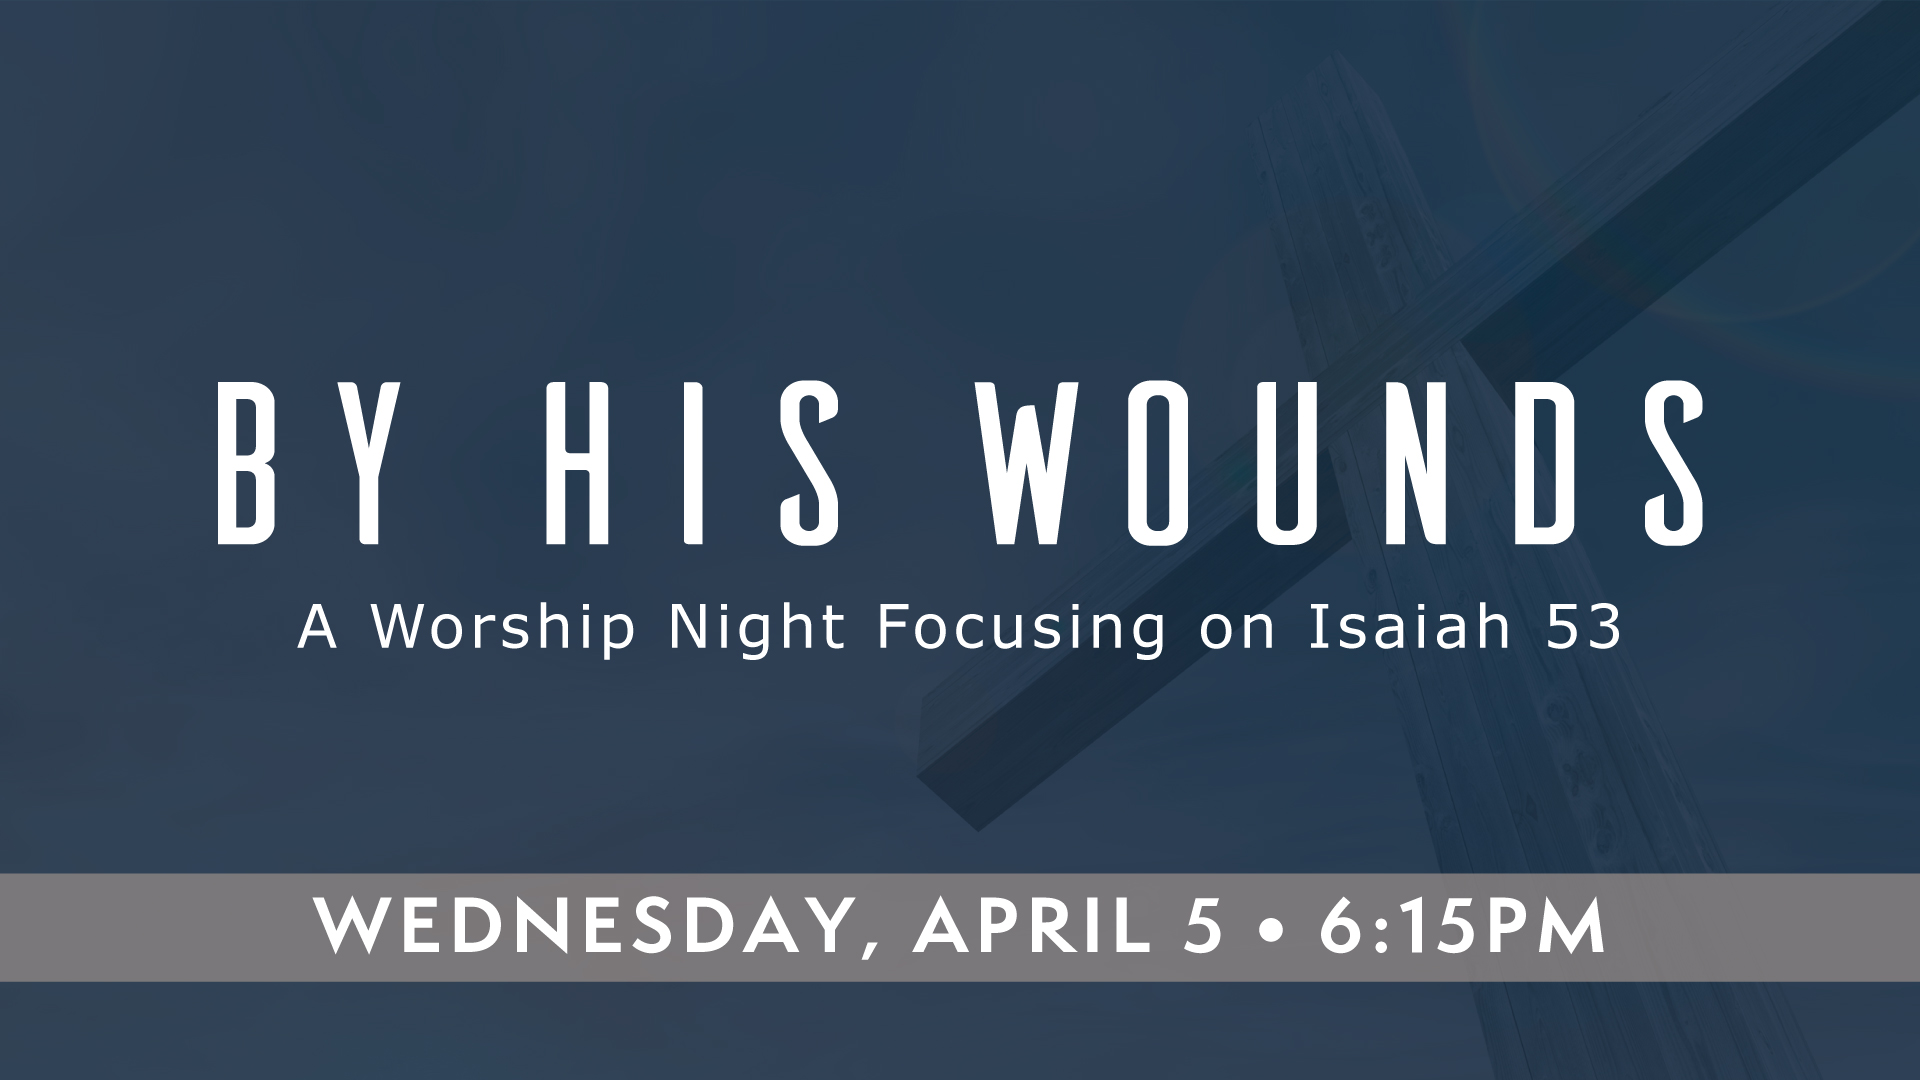 By His Wounds: A Worship Night Focusing on Isaiah 53. Wednesday, April 5 at 6:15pm